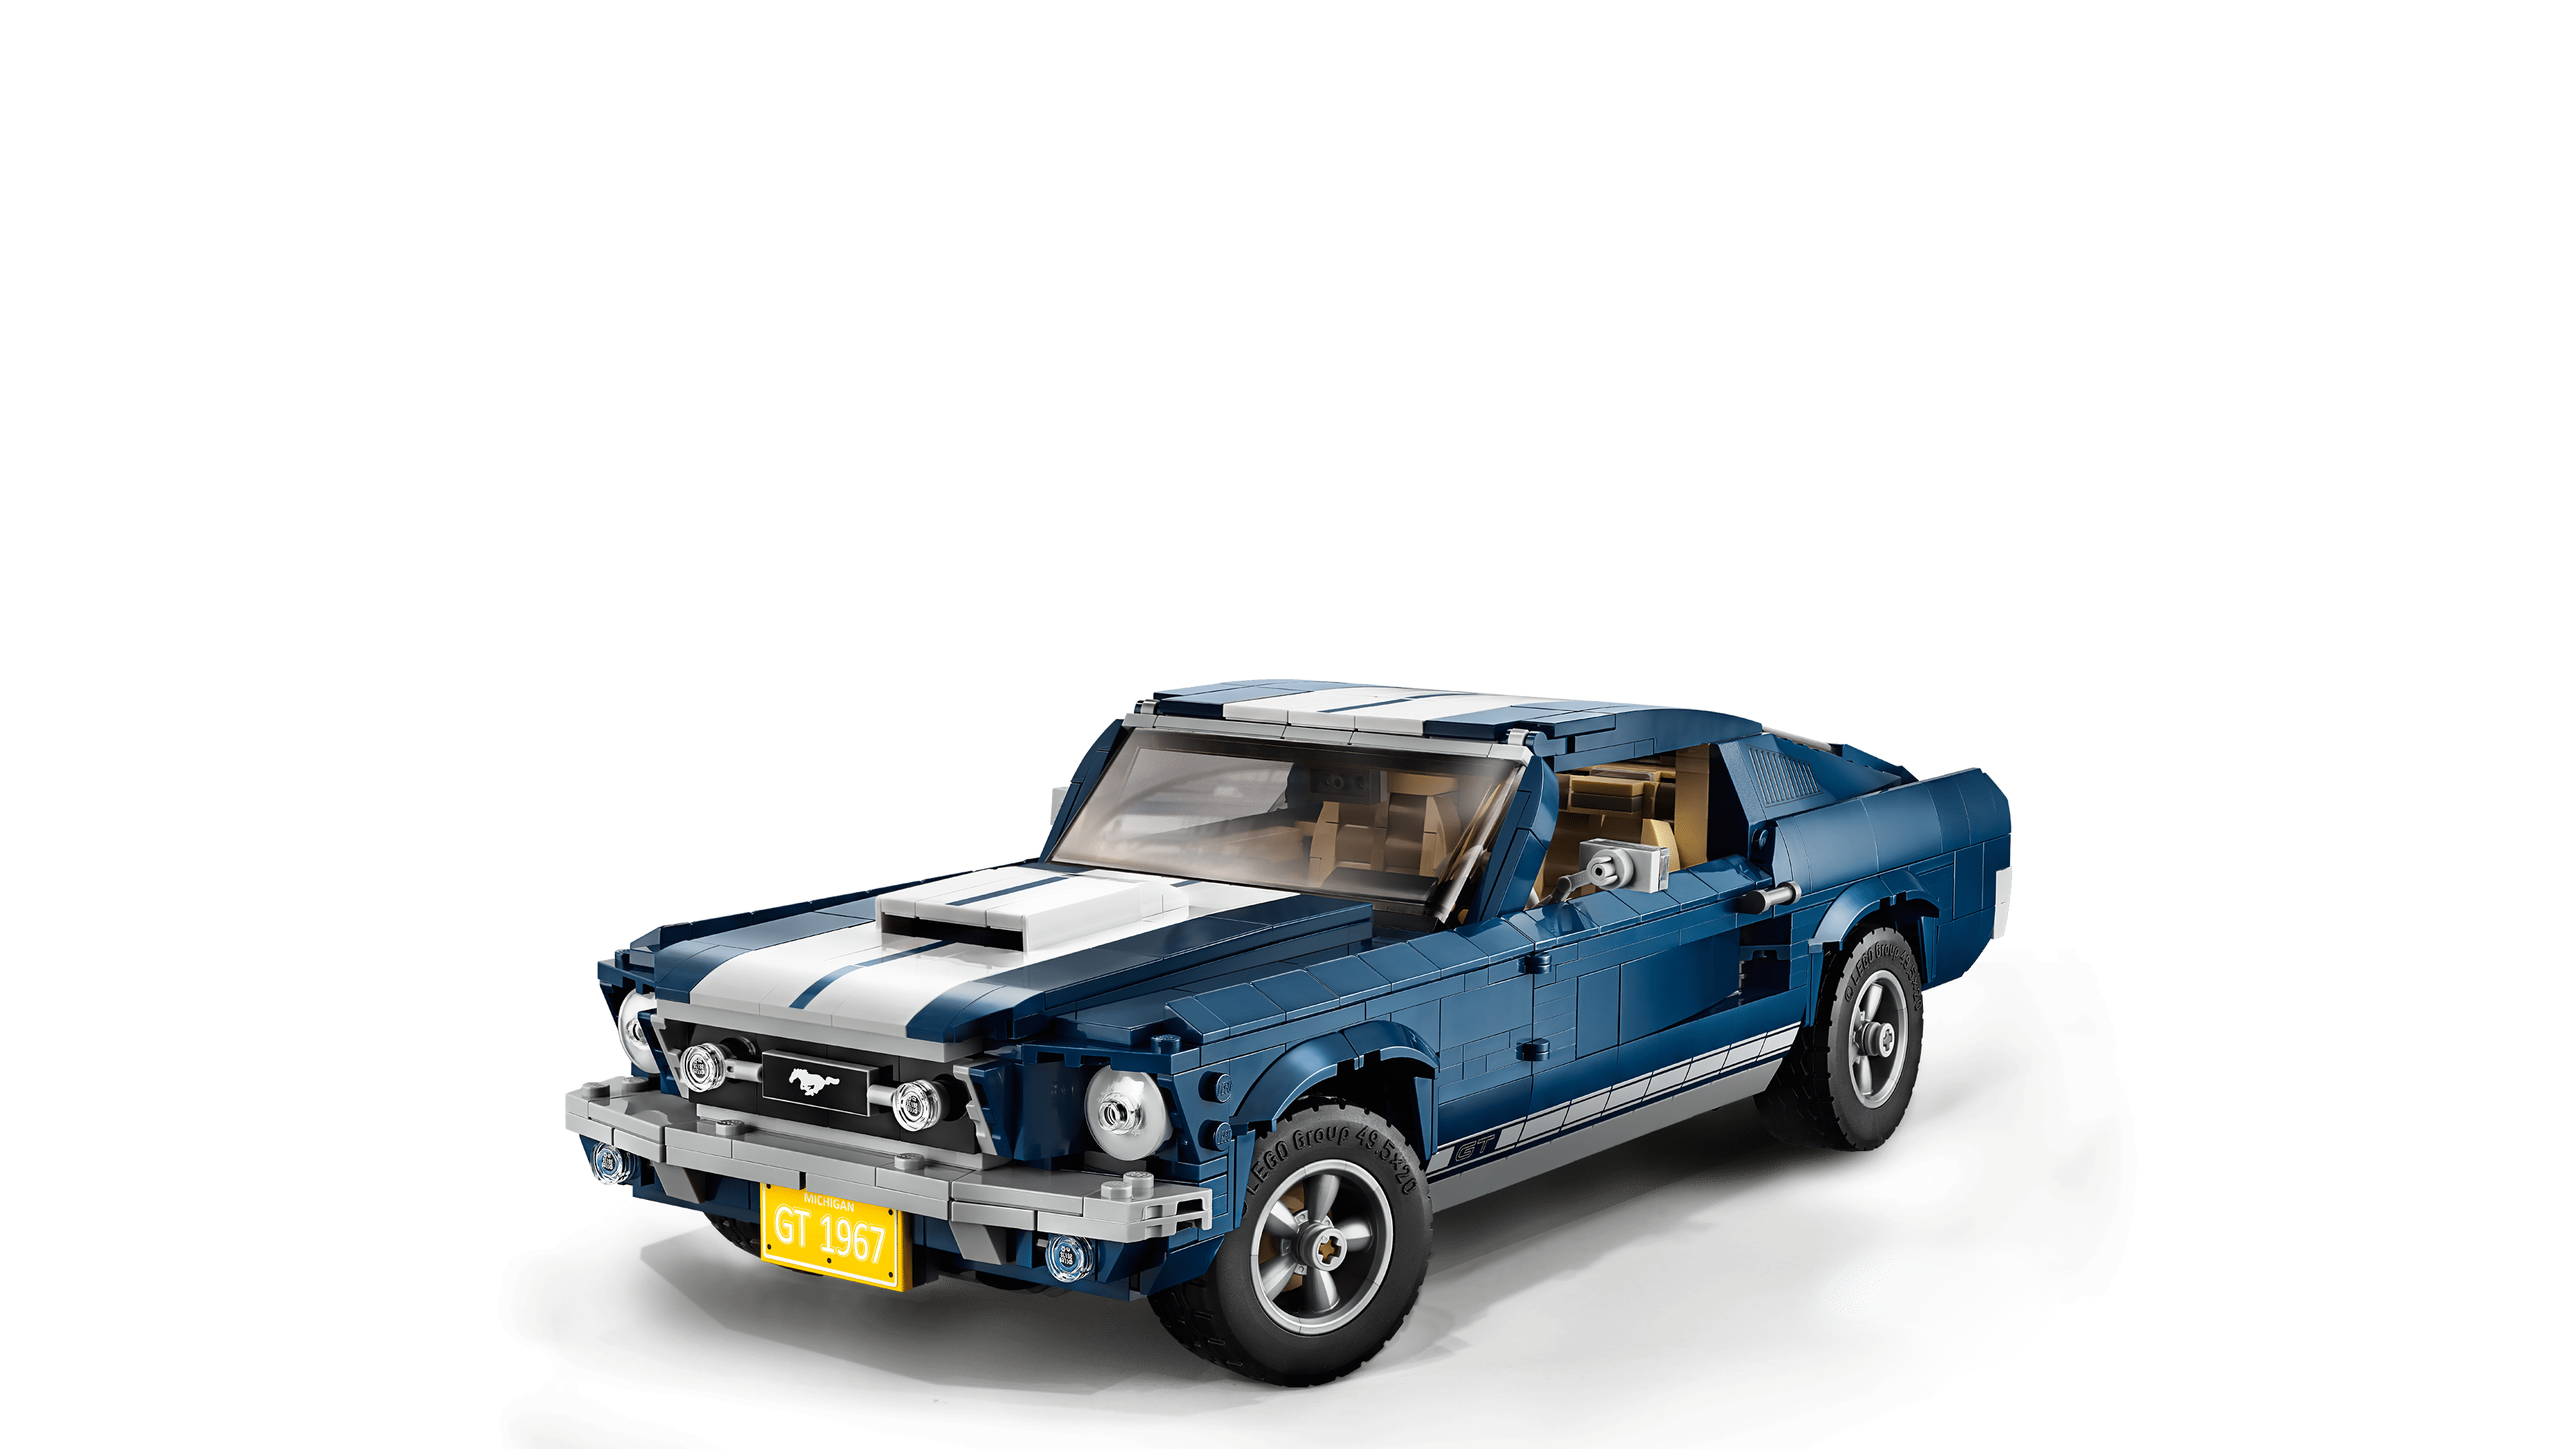 LEGO Creator Expert Ford Mustang 10265 Building Set - Exclusive Advanced Collector's Car Model, Featuring Detailed Interior, V8 Engine, and Office Display, Collectible for Adults and Teens - Walmart.com